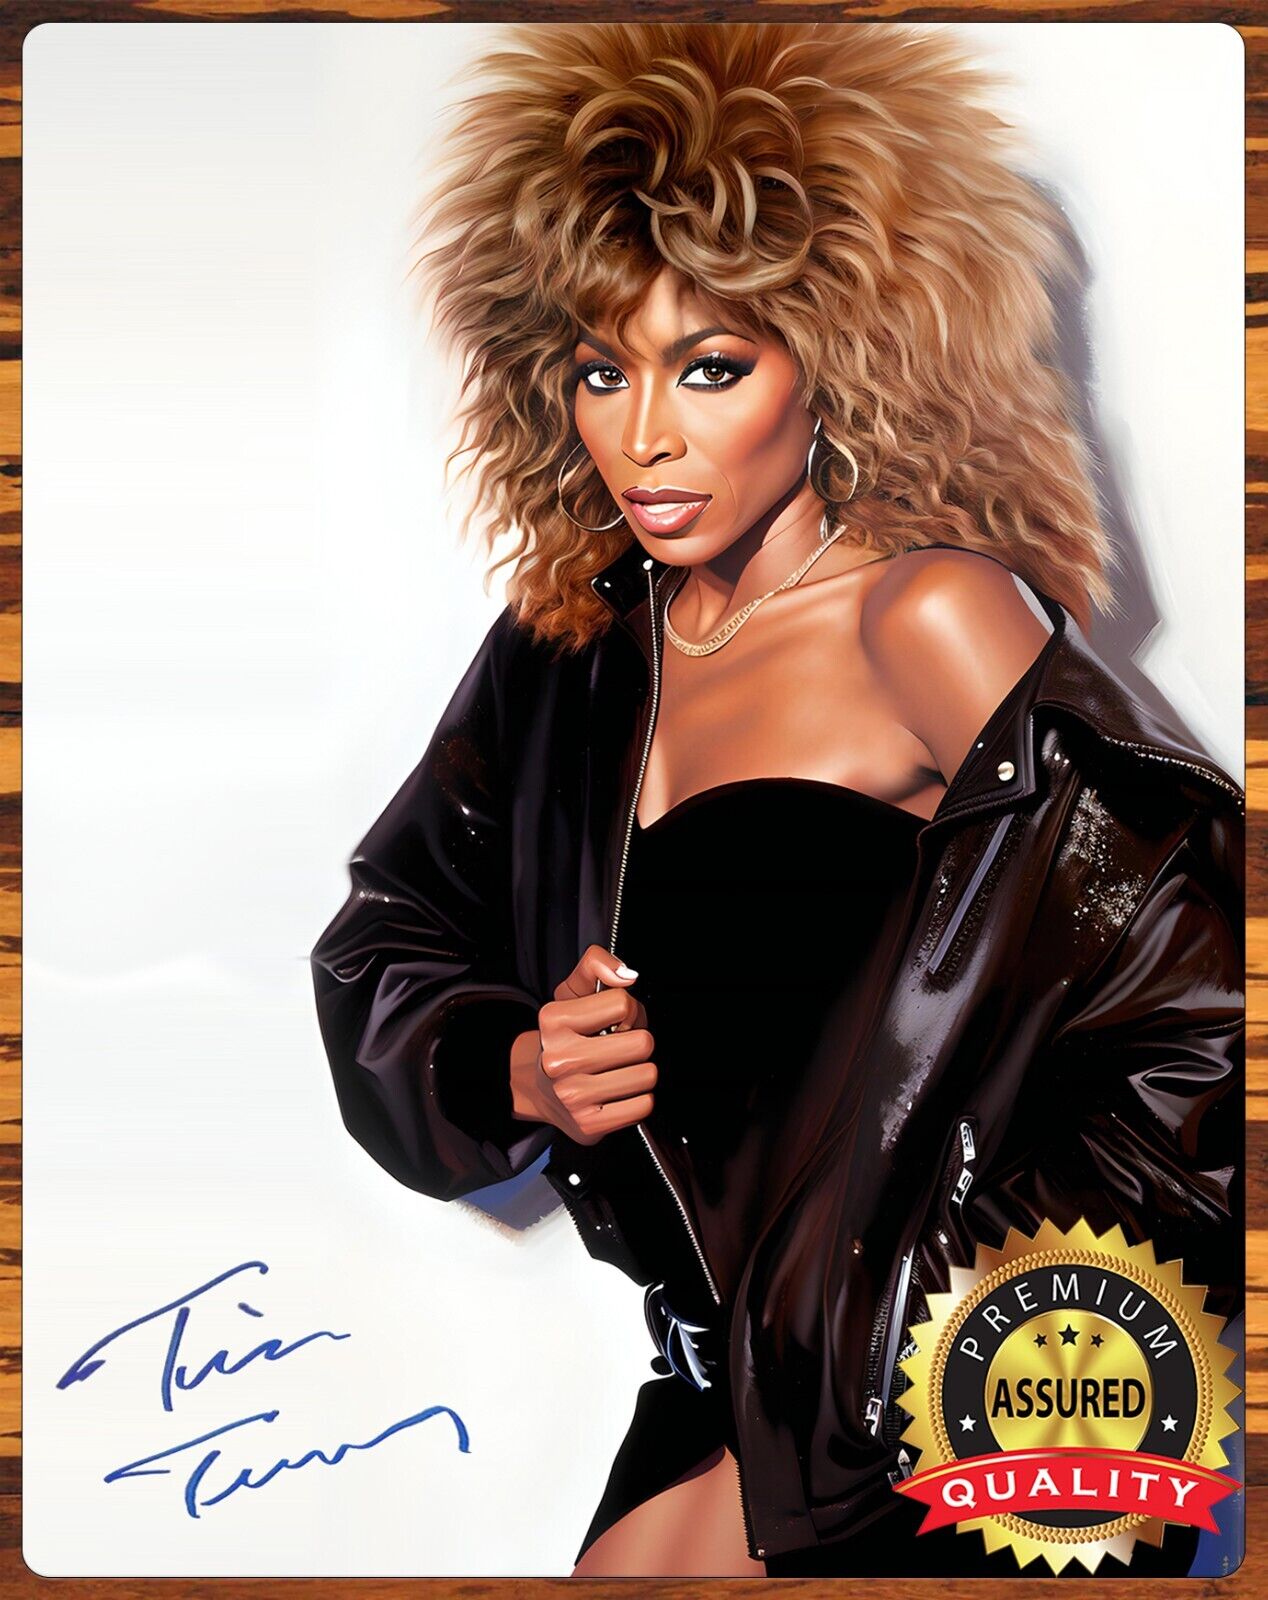 Tina Turner - Signed - Painting - Reprint Limited Prints - Metal Sign 11 x 14